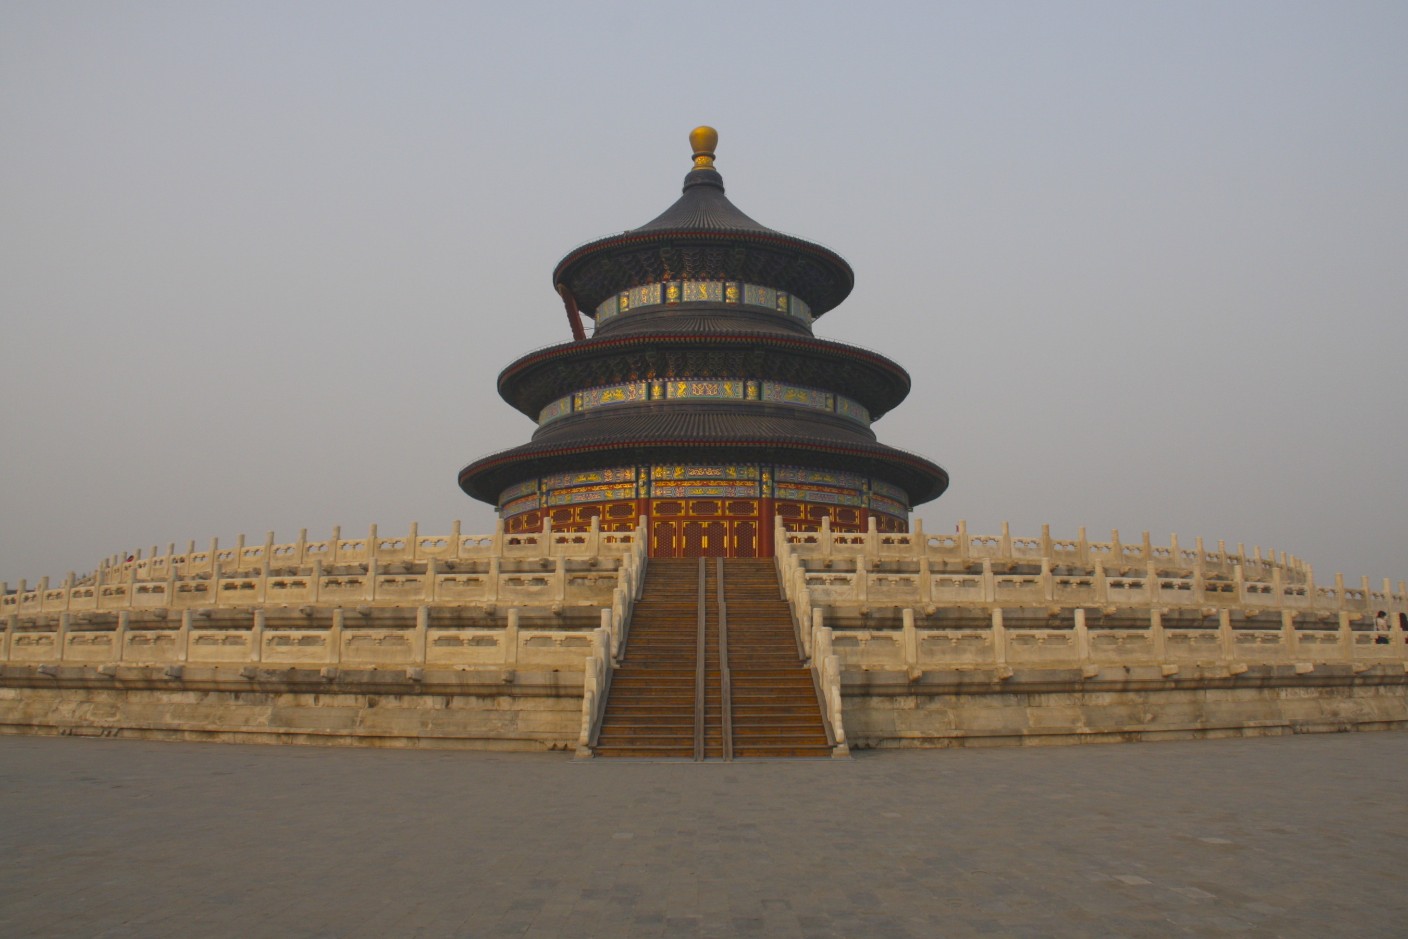 Between Heaven and Earth, The Temple of Heaven | notesfromcamelidcountry